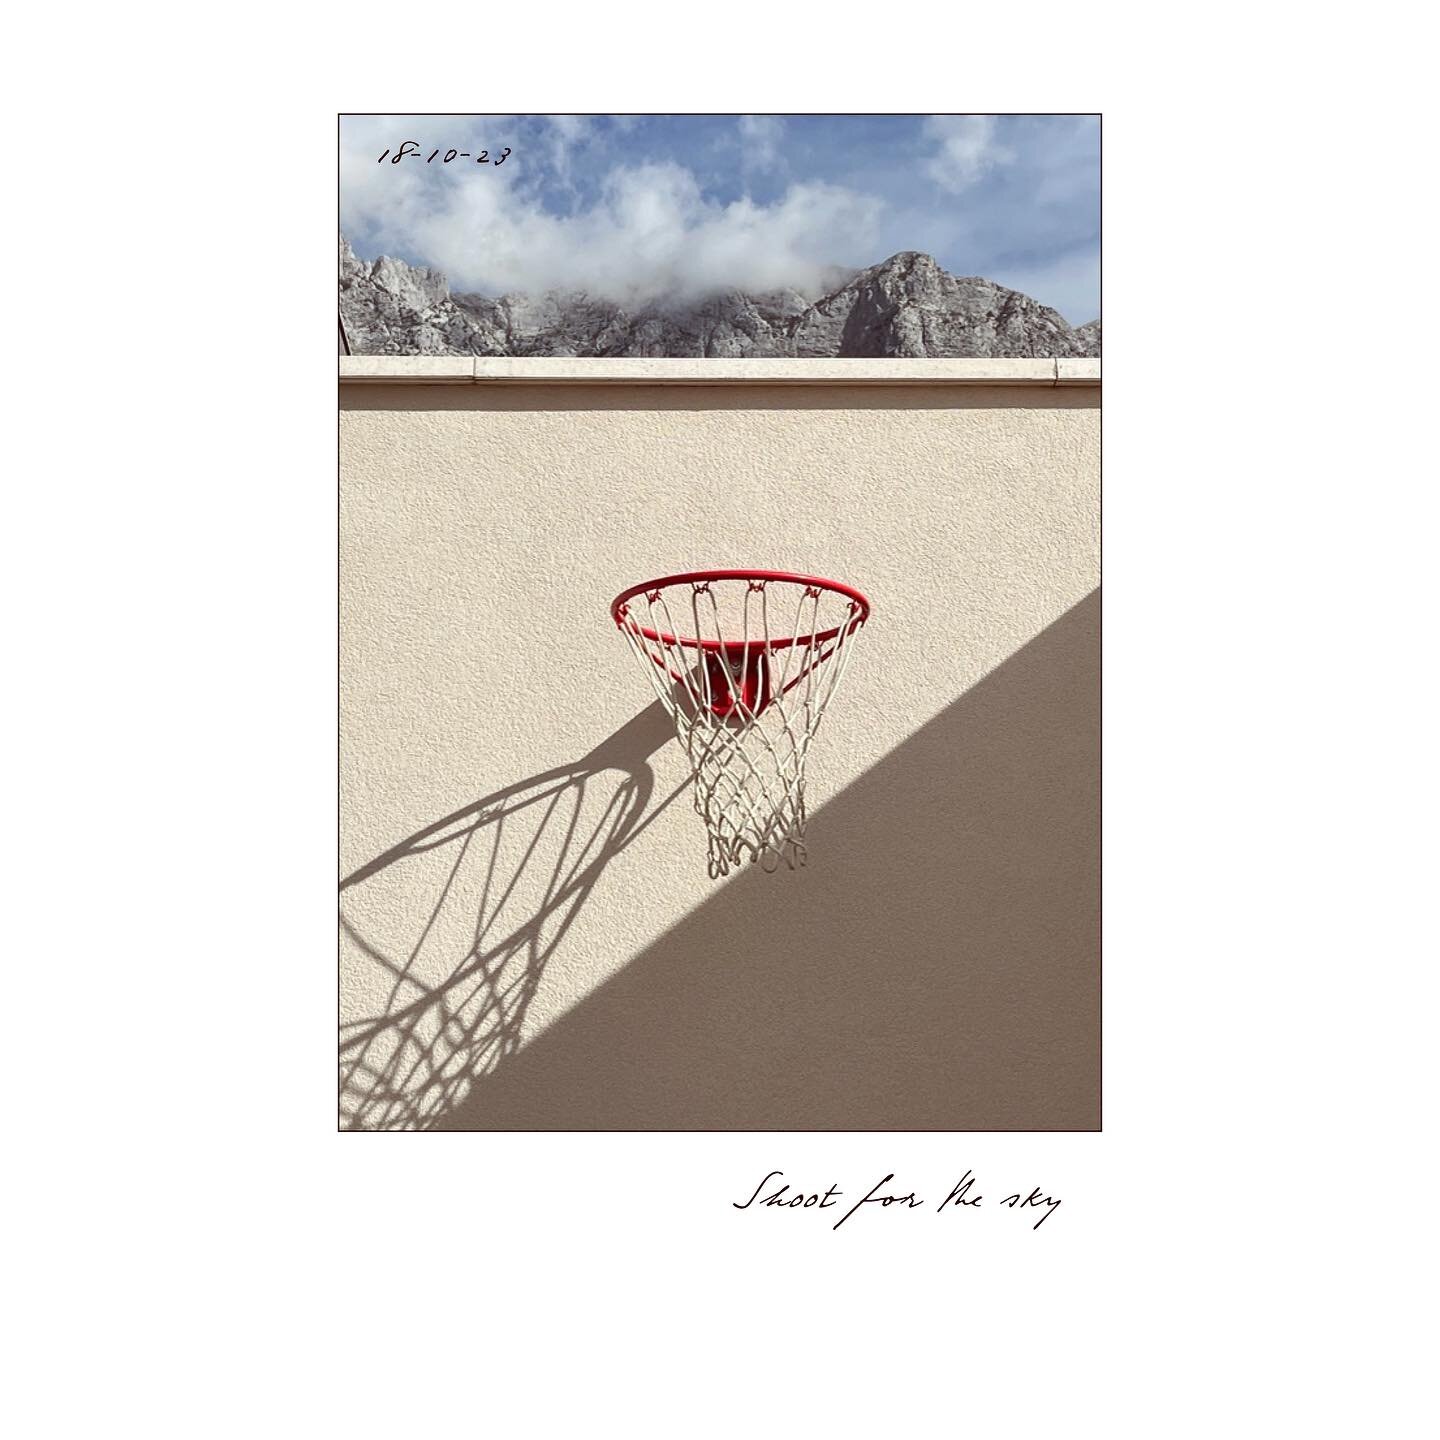 Shoot for the sky
:
:
;
chin up, shoulders back.
#theviewfromhere #basketballtime #nothingbutnet #mountaintops #picbyme #keepitsimple #itsthursday